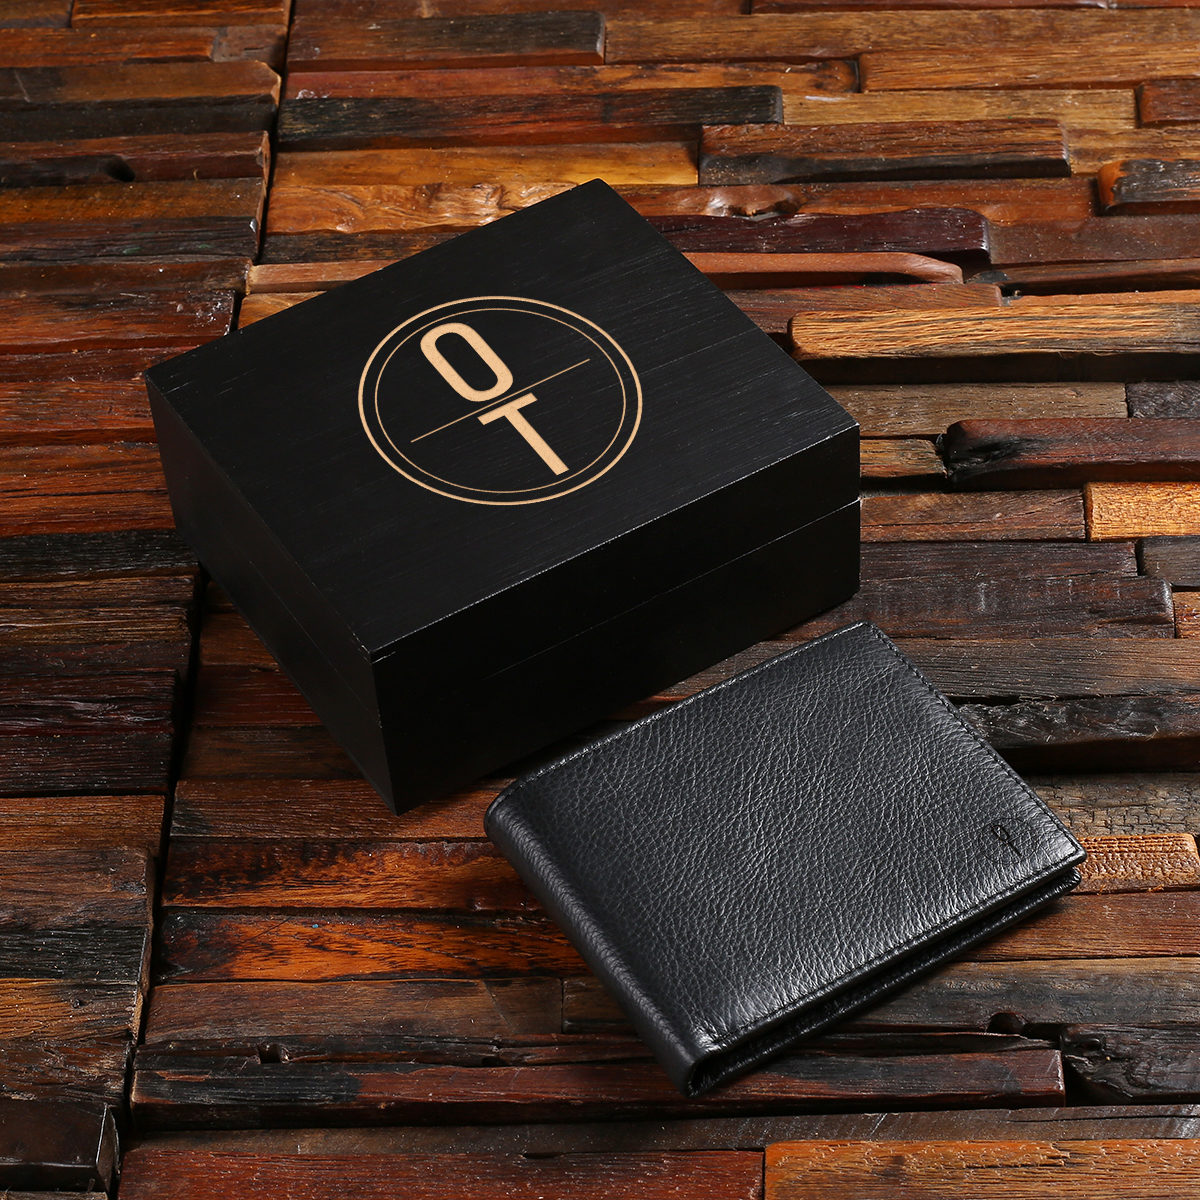 Men’s Personalized Black Engraved Leather Wallet & Black Wood Box T-024990-B|Men’s Personalized Black Engraved Leather Wallet & Black Wood Box T-024990-B Box|Men’s Personalized Black Engraved Leather Wallet T-024990-B|Men’s Personalized Black Engraved Leather Wallet & Black Wood Box T-024990-B Unpersonalized Bifold Open|Men’s Personalized Black Engraved Leather Wallet & Black Wood Box T-024990-B ID Card Pockets|Men’s Personalized Black Engraved Leather Wallet & Black Wood Box T-024990-B ID Card|Men’s Personalized Black Engraved Leather Wallet & Black Wood Box T-024990-B Unpersonalized|Printed Box Photographs Corporate Gift Solutions